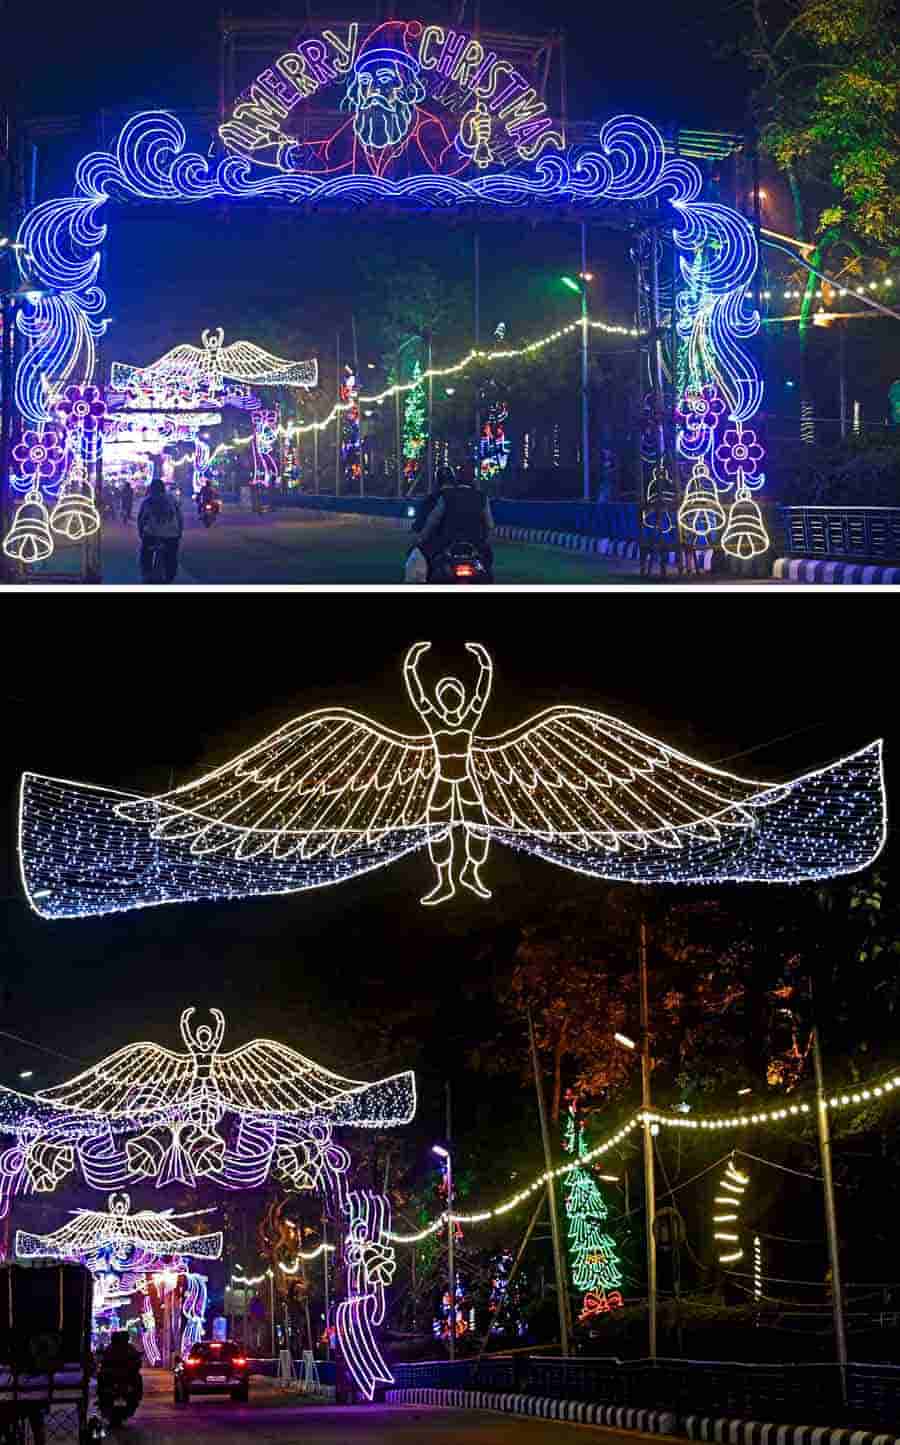 The streets at Sreebhumi lit-up with festive lights on December 24